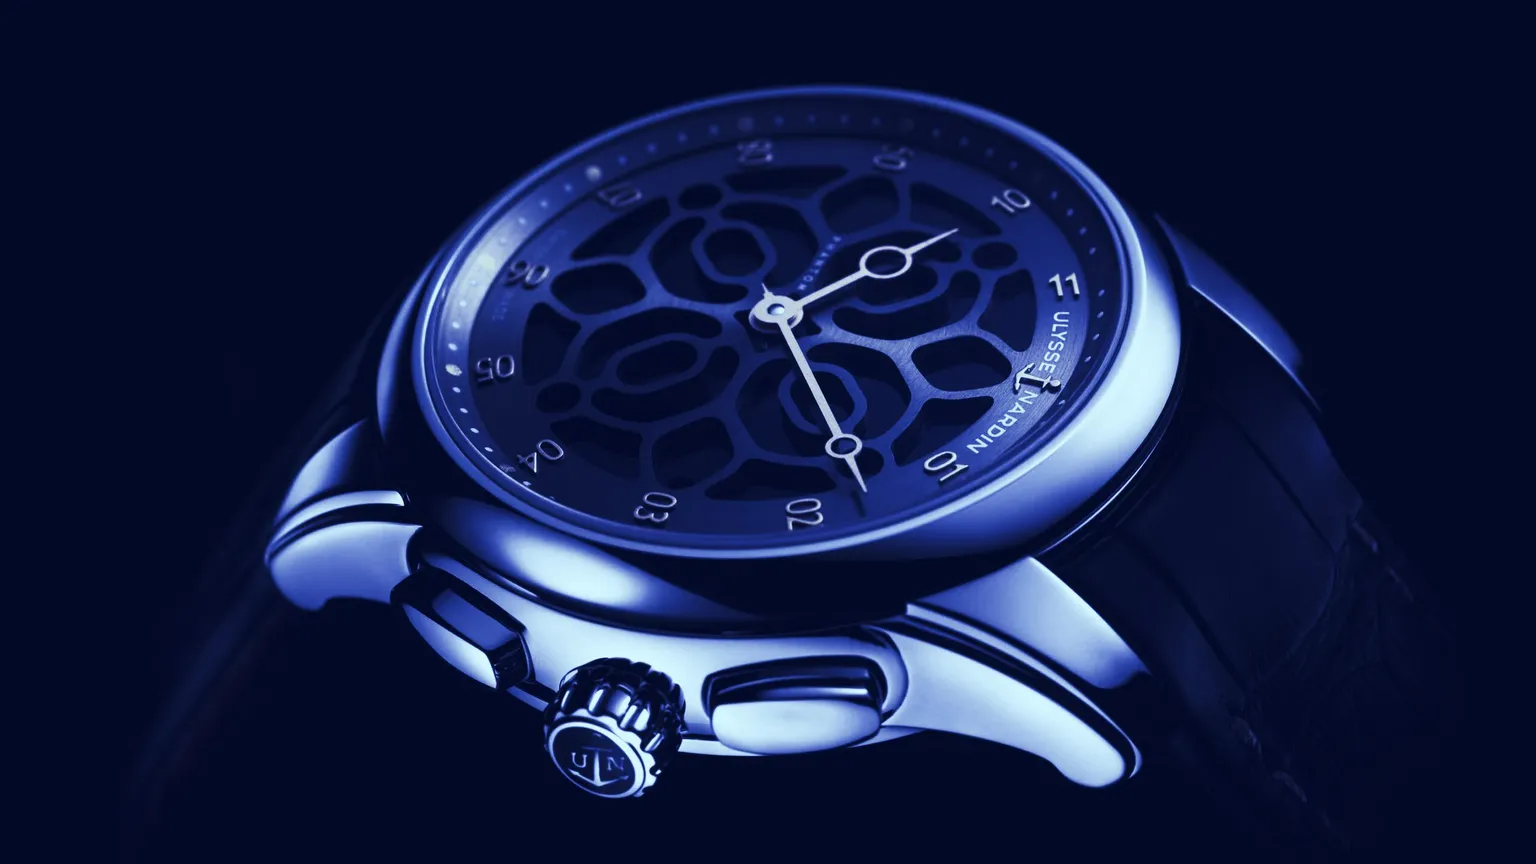 Bitcoin and blockchain are the latest hot trends among watchmakers. Image: Kering.